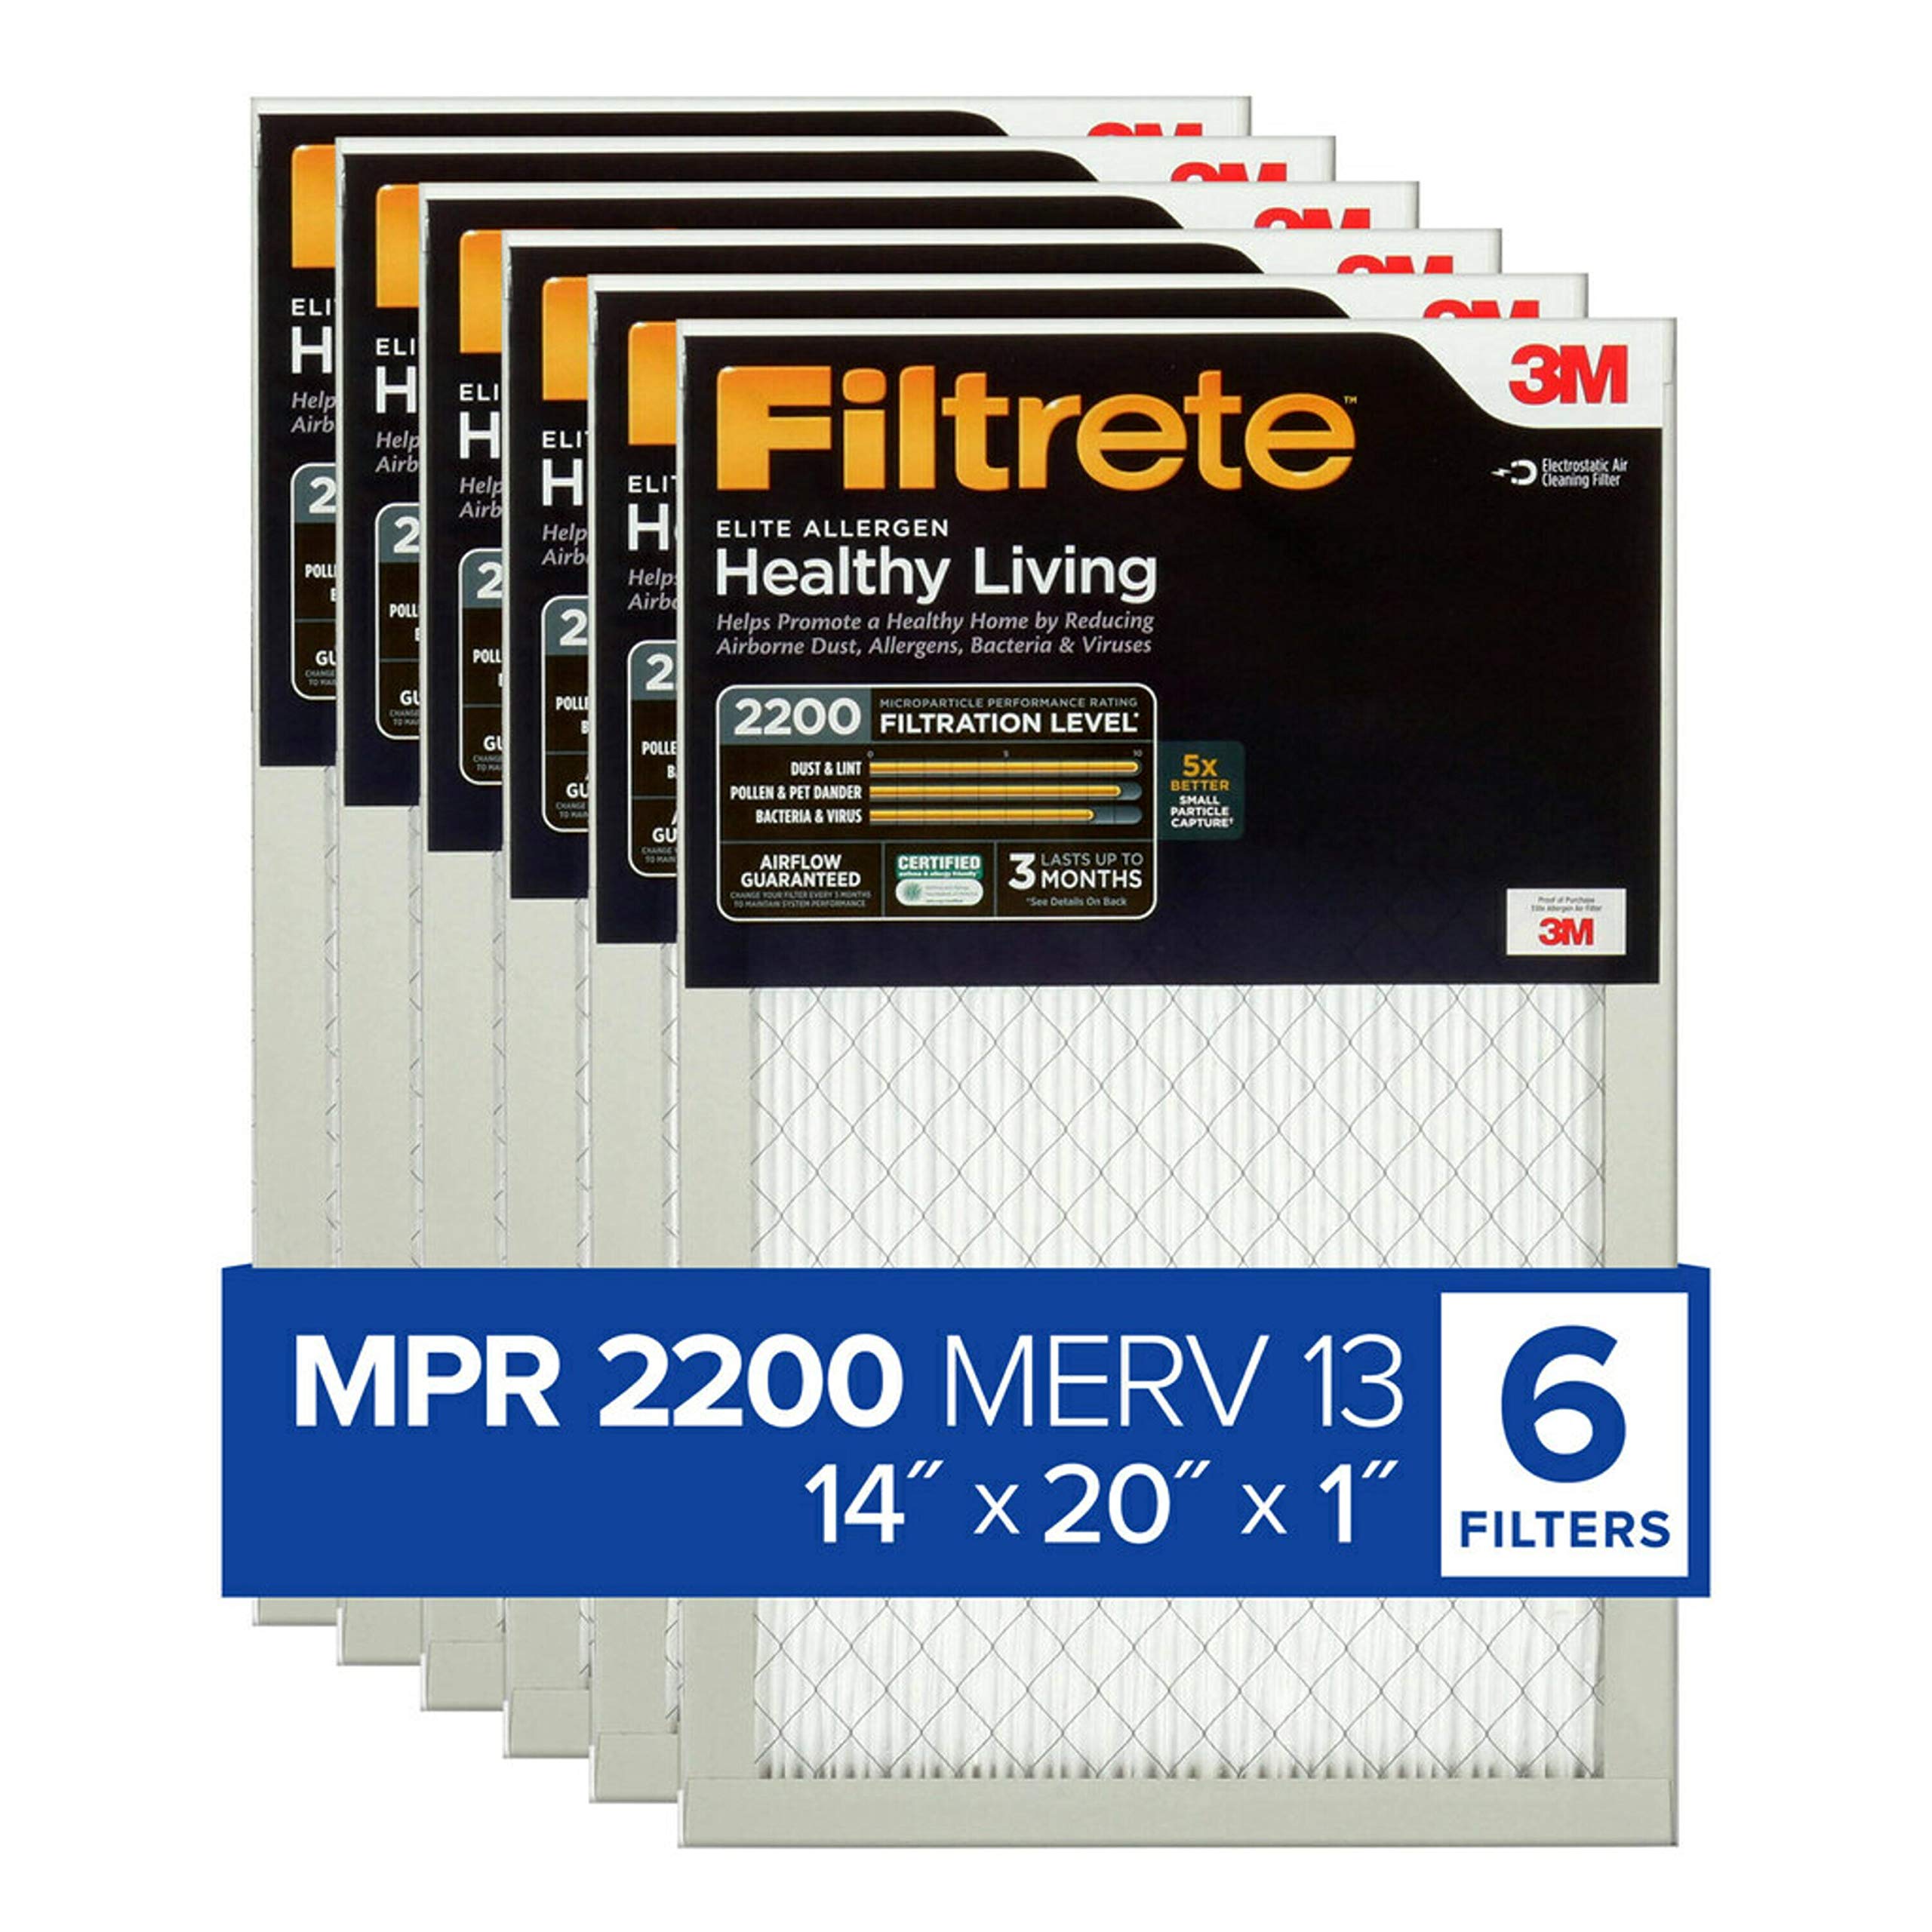 Filtrete 14x20x1 Air Filter, MPR 2200, MERV 13, Healthy Living Elite Allergen 3-Month Pleated 1-Inch Air Filters, 6 Filters